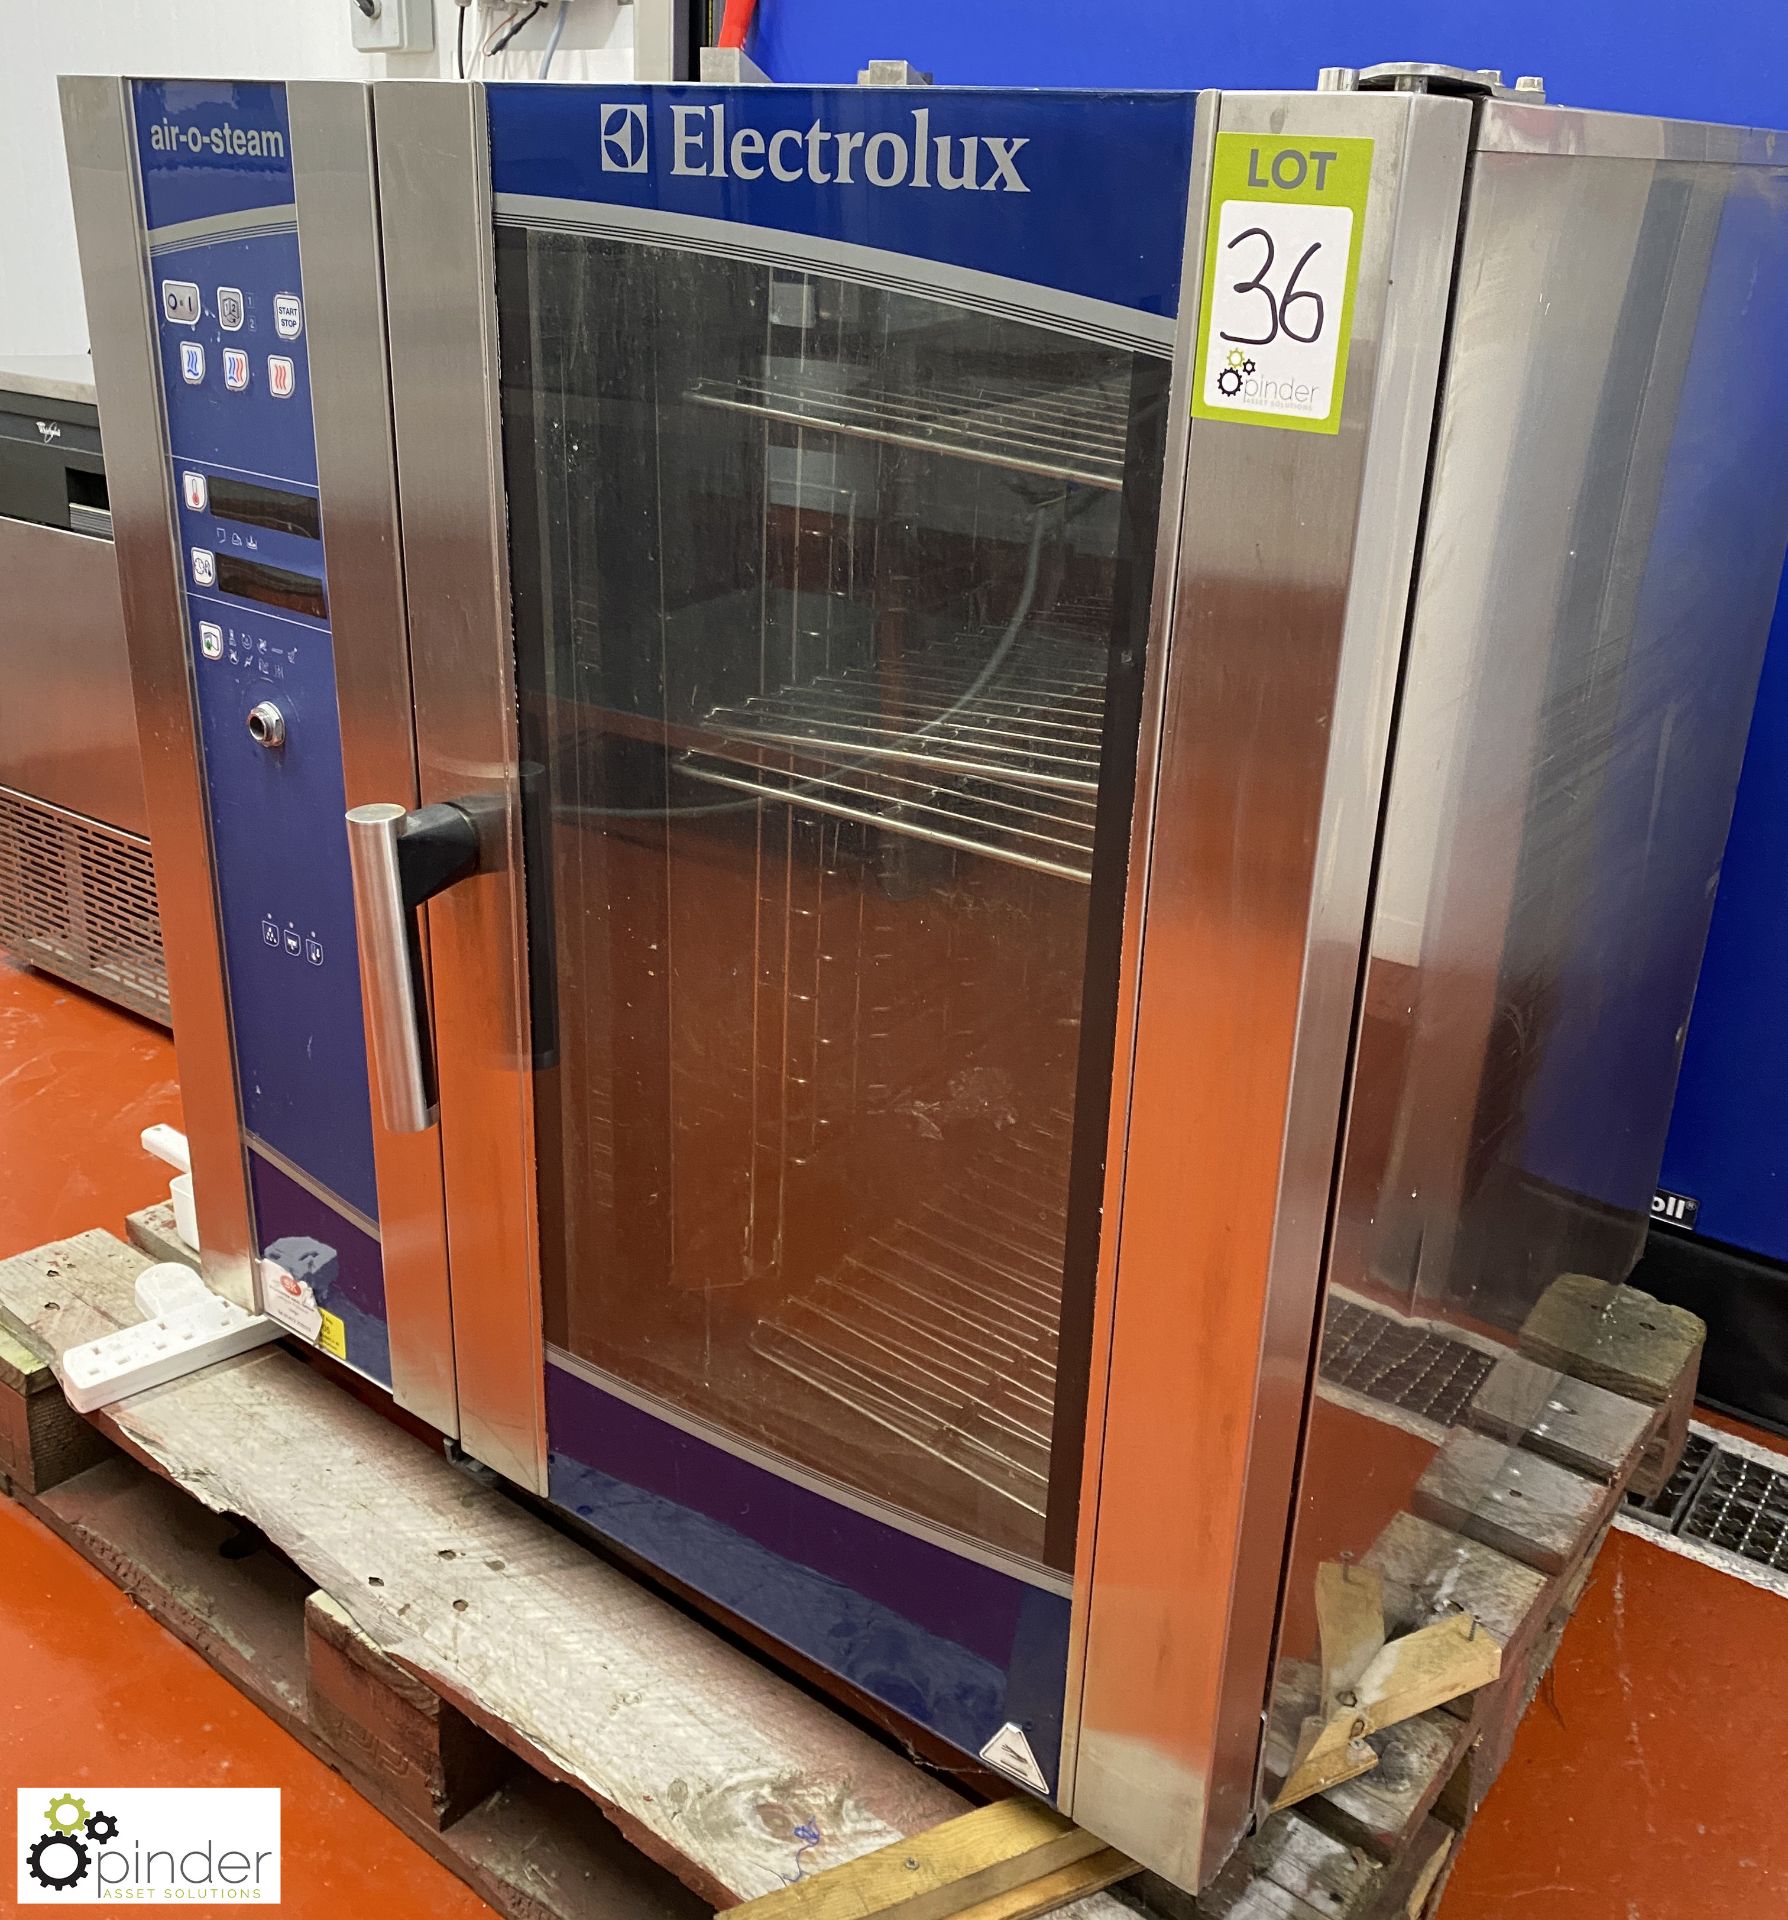 Electrolux Air-O-Stream 10-tray Combi Oven, 230volts, 900mm x 850mm x 930mm (Lift Out Fee: £40 - Image 2 of 6